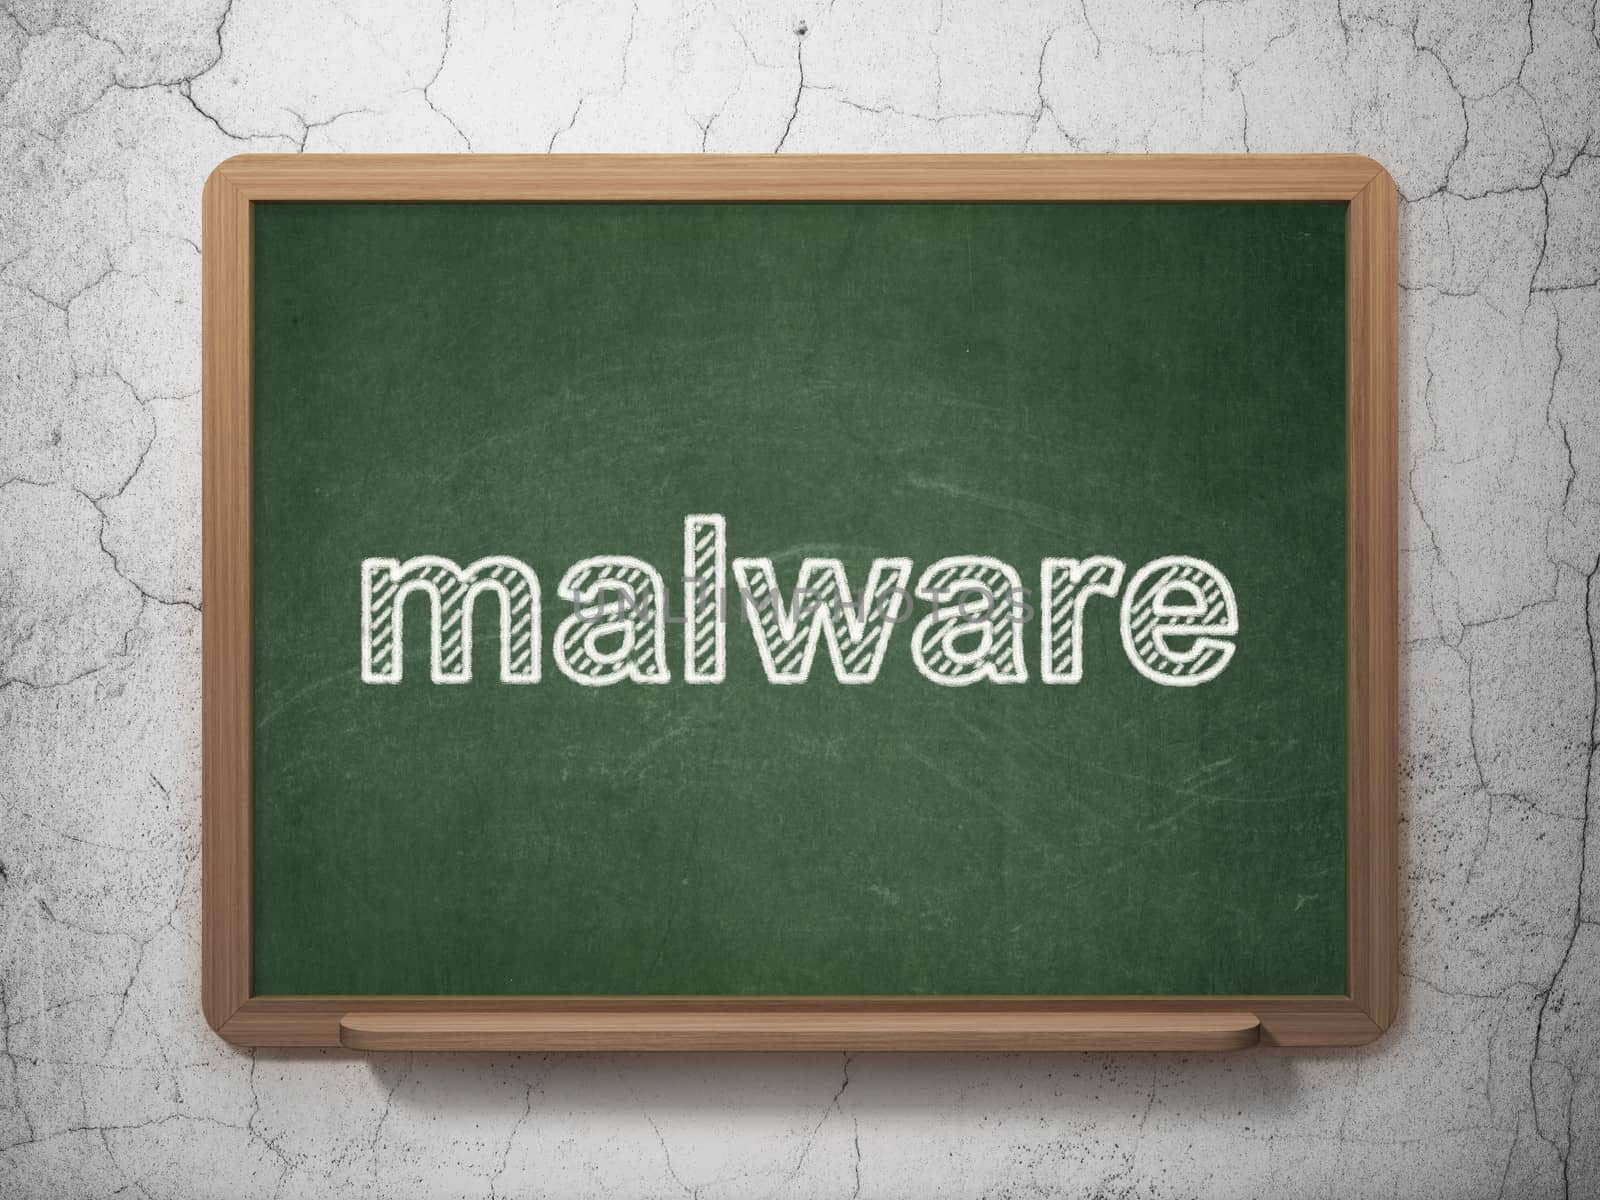 Protection concept: text Malware on Green chalkboard on grunge wall background, 3d render